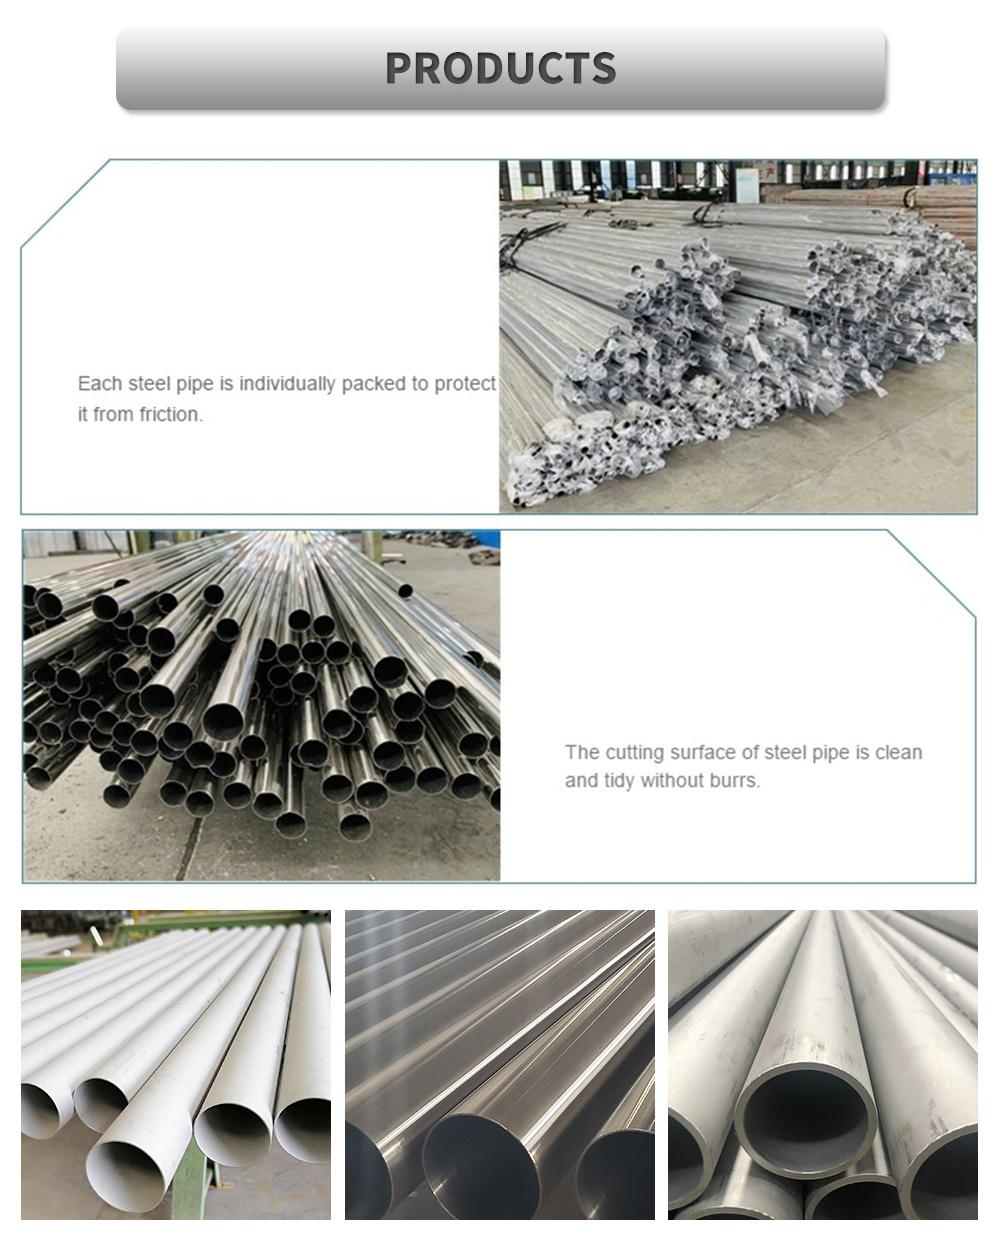 Hot Rolled/Cold Drawn Round Bright 304L 316L Stainless Steel Welded Tube 30 Inch Seamless Austenitic and Duplex Steel Tube Pipe for Industry/Oil/Gas